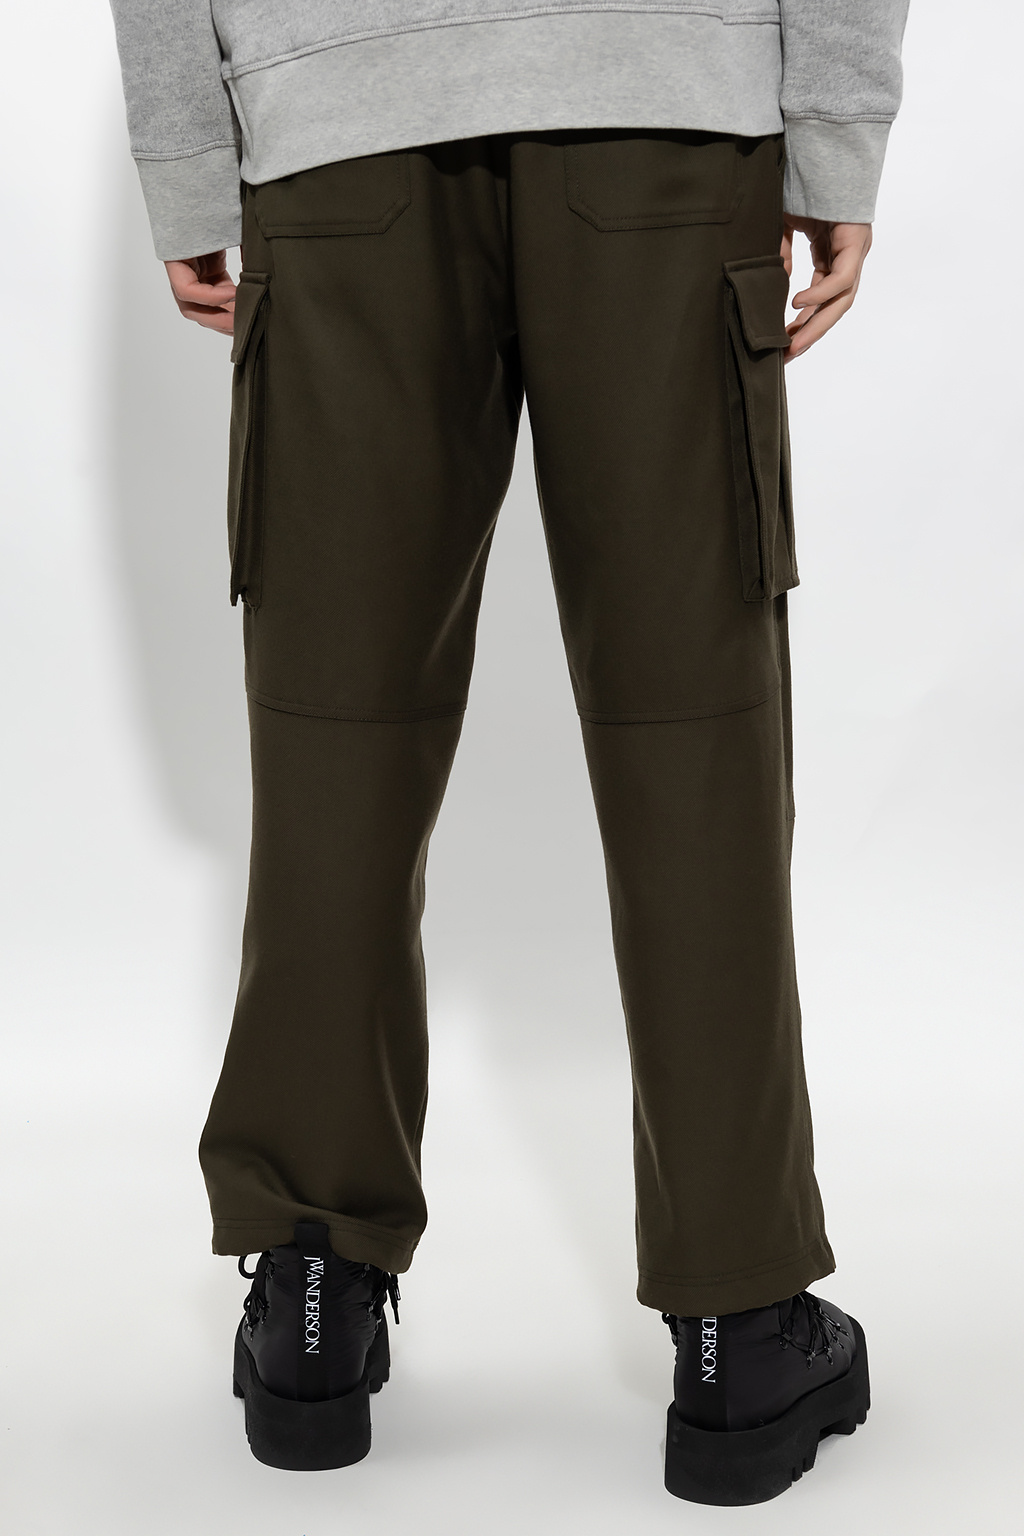 Moncler Grenoble Insulated trousers